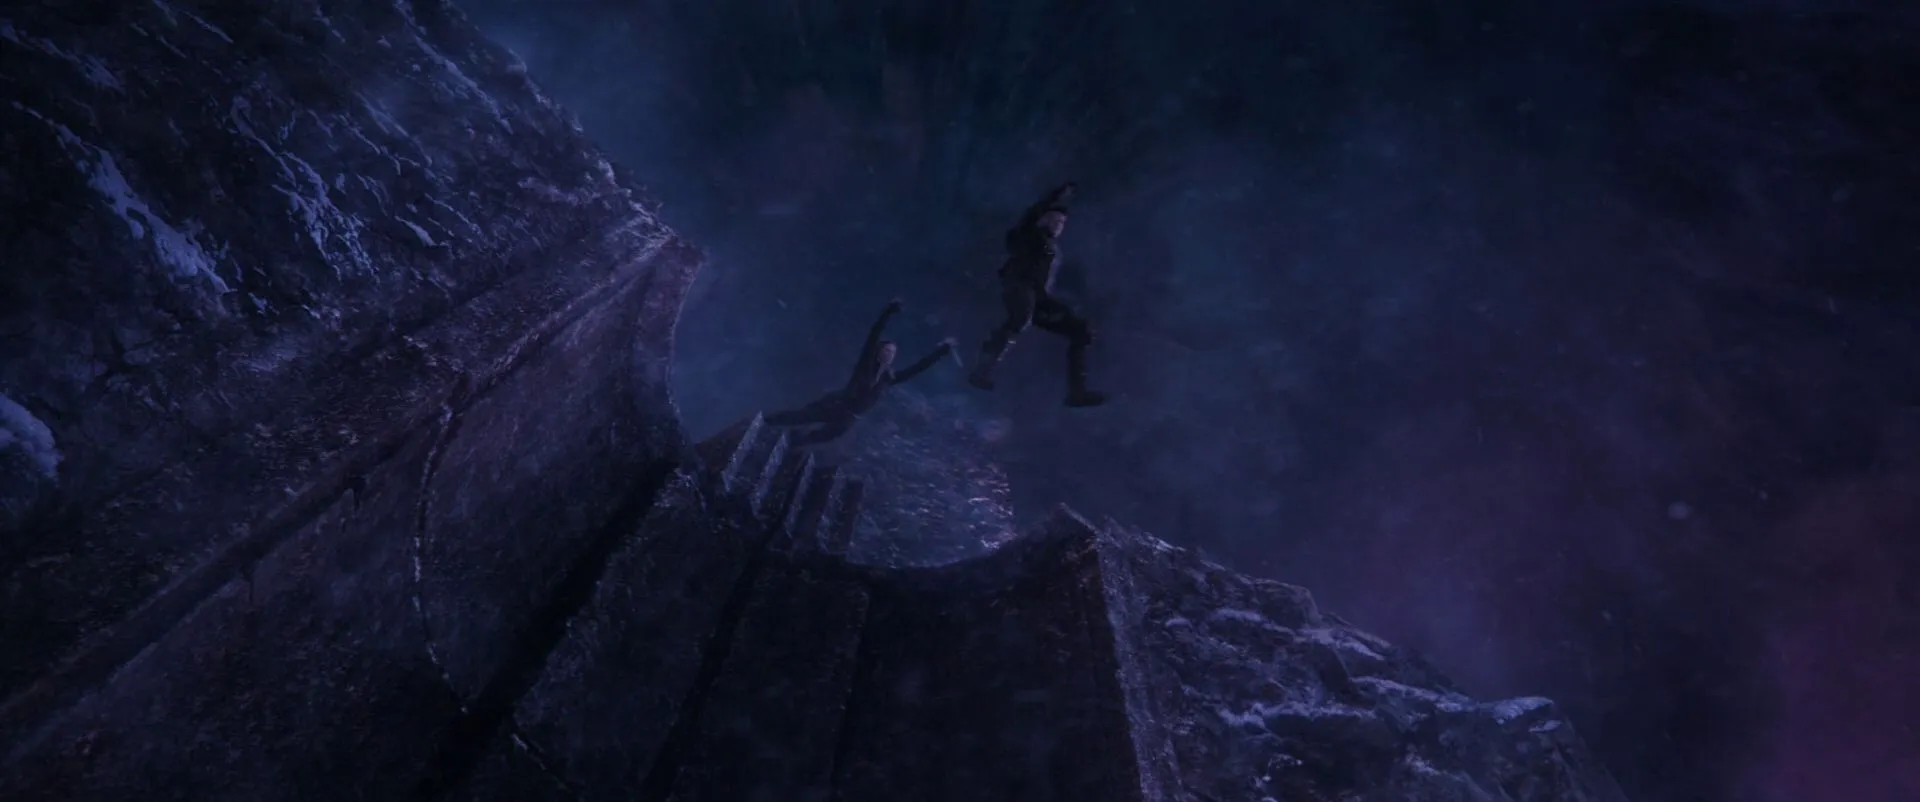 Black Widow dives after Hawkeye as he leaps off the cliff.